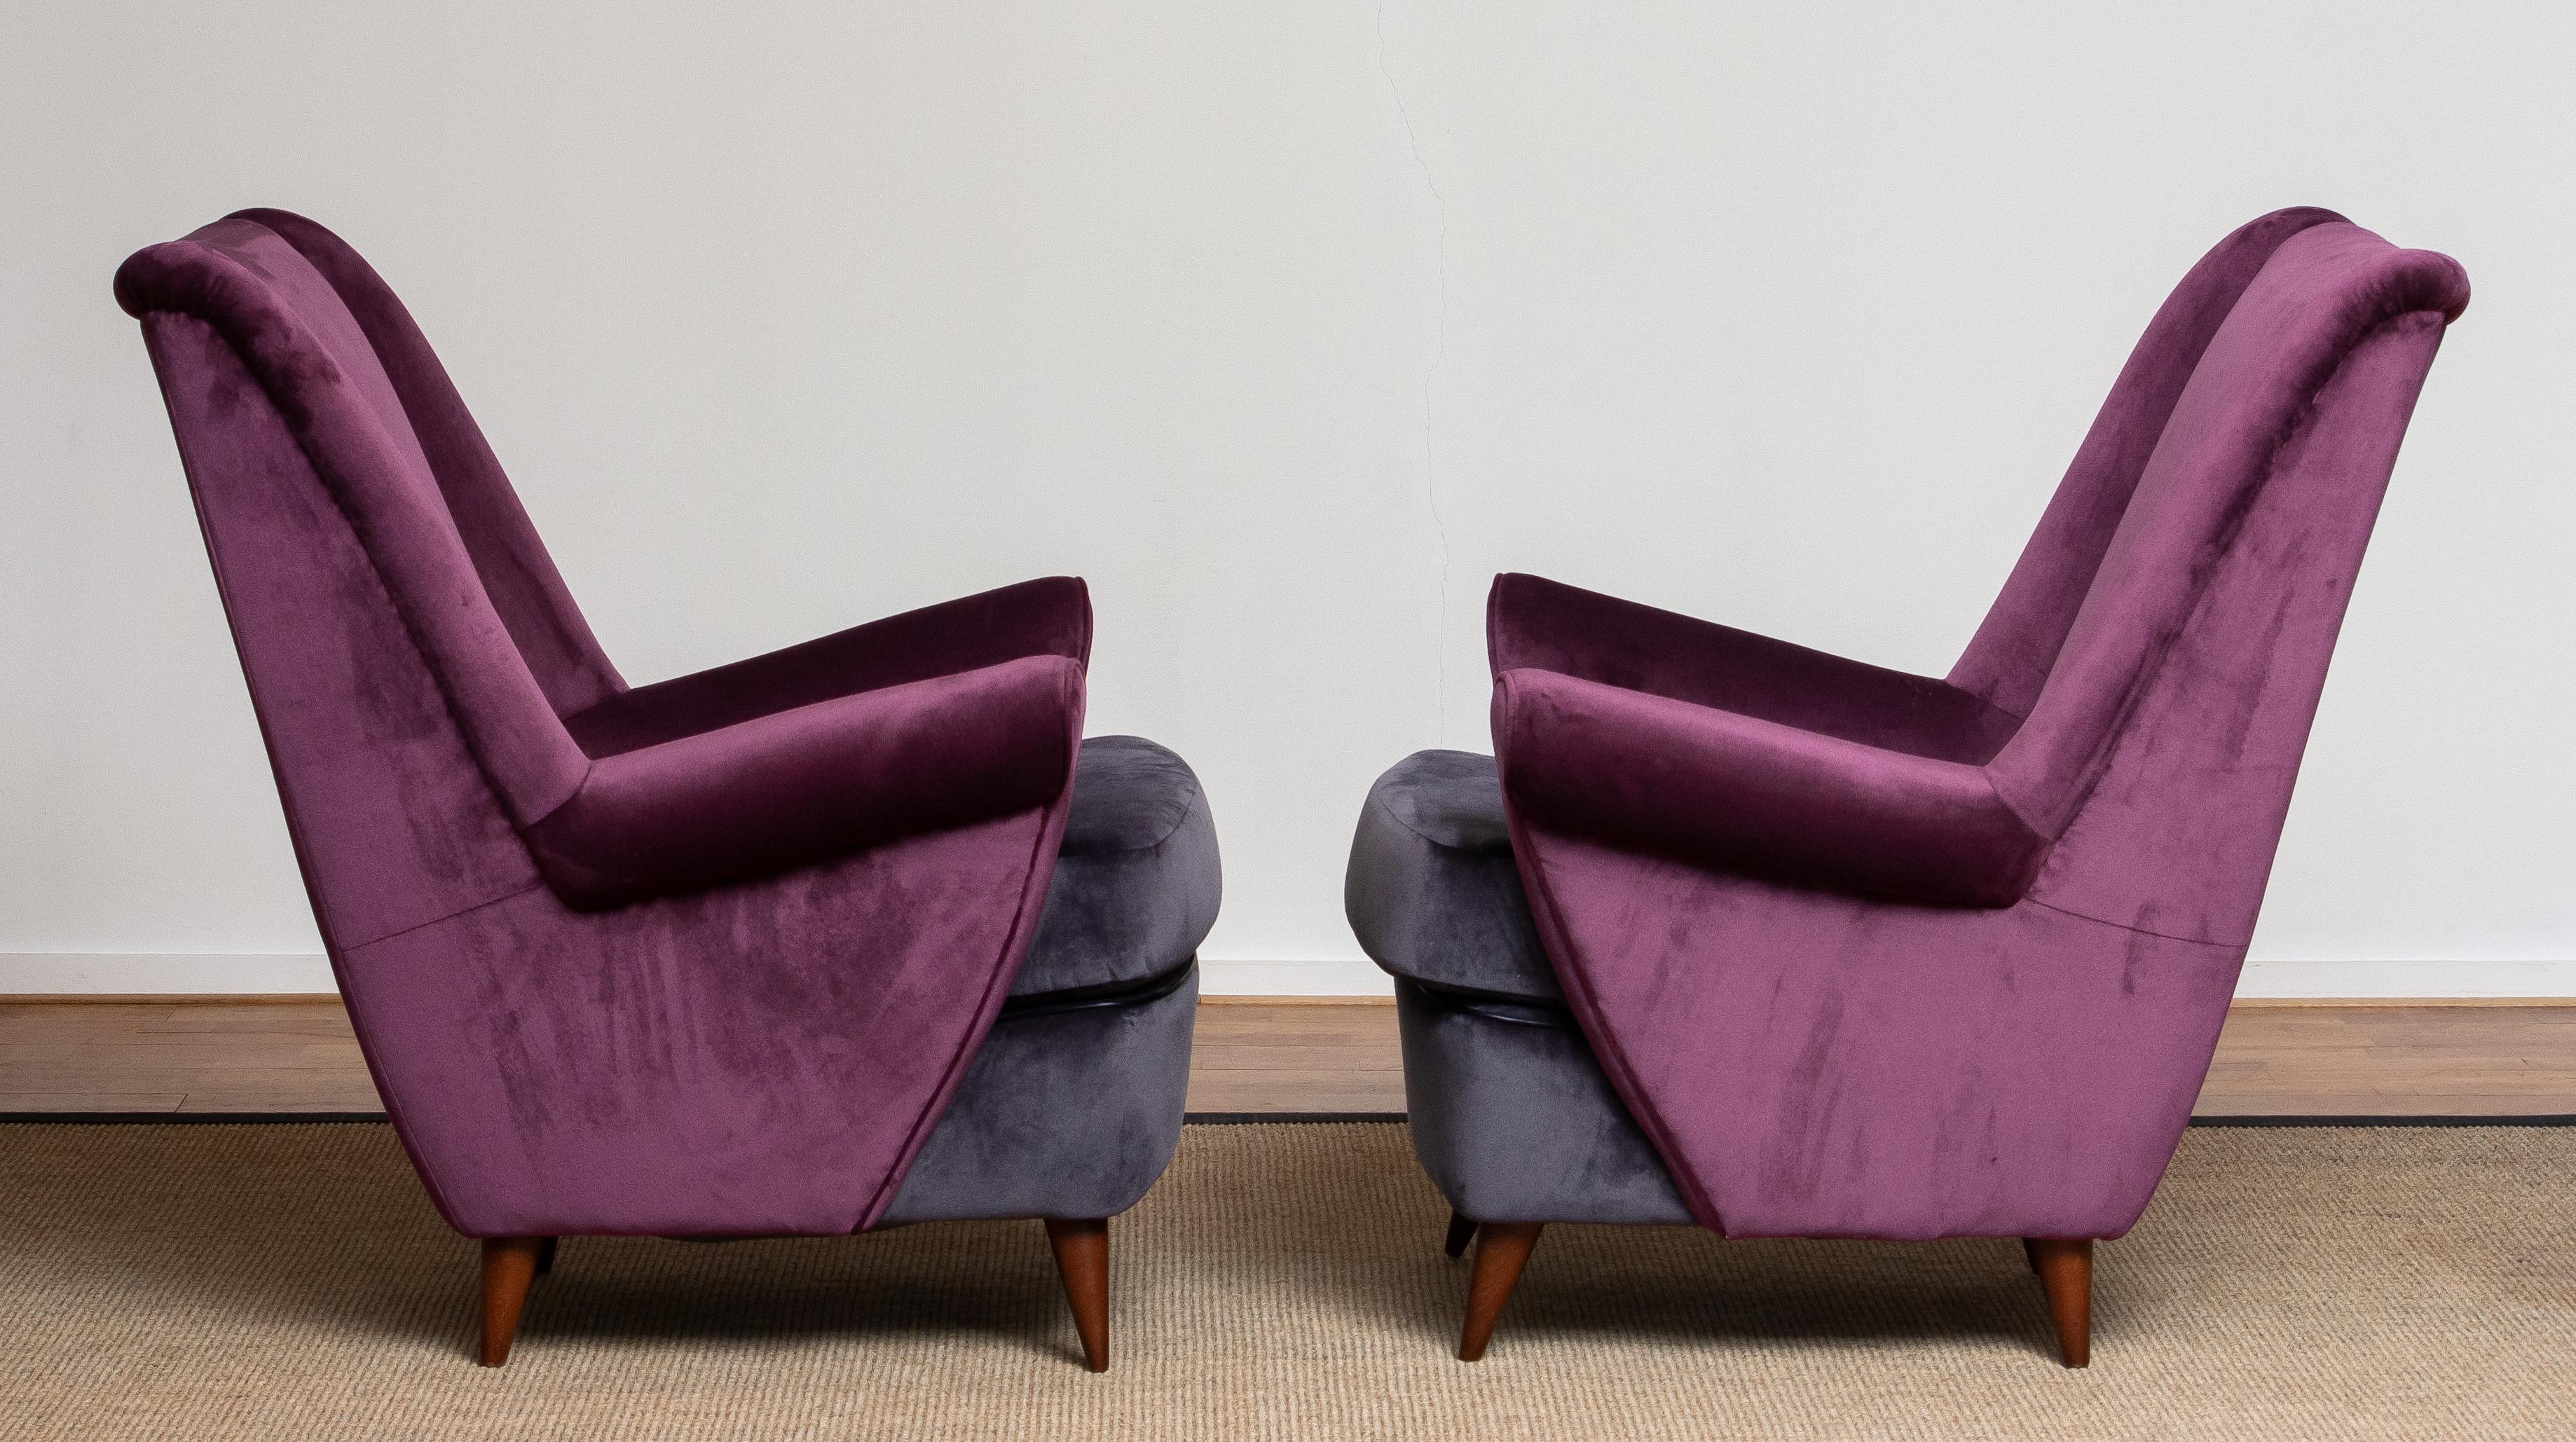 Absolutely beautiful set of two 1950s lounge or easy chairs designed by Gio Ponti and made by ISA in Bergamo in Italy. The fabulous color combination and choice of fabric, magenta and dark gray, makes these chairs a real eye catcher. This chairs are